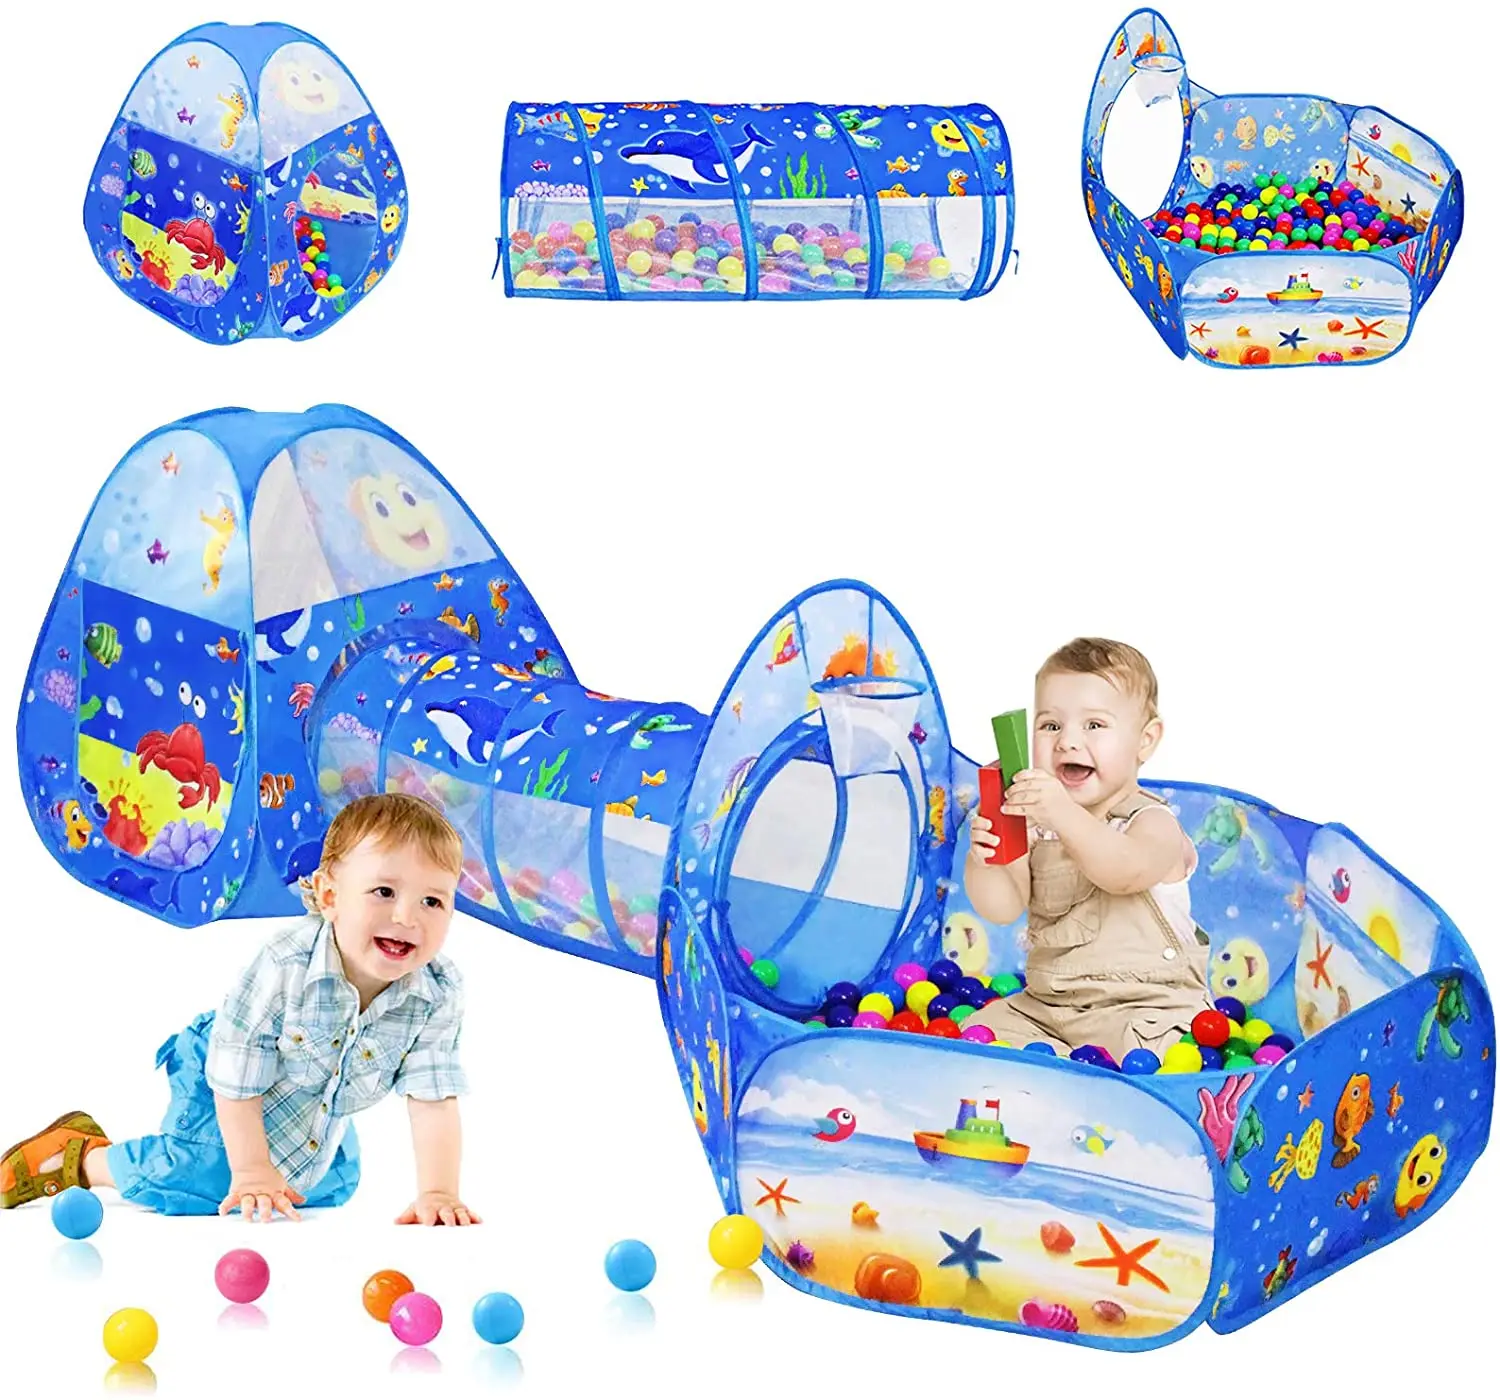 3in1 Kids Tent Crawling Toddlers Play House Baby Play Yard Tunnel Ball Pits Pool 